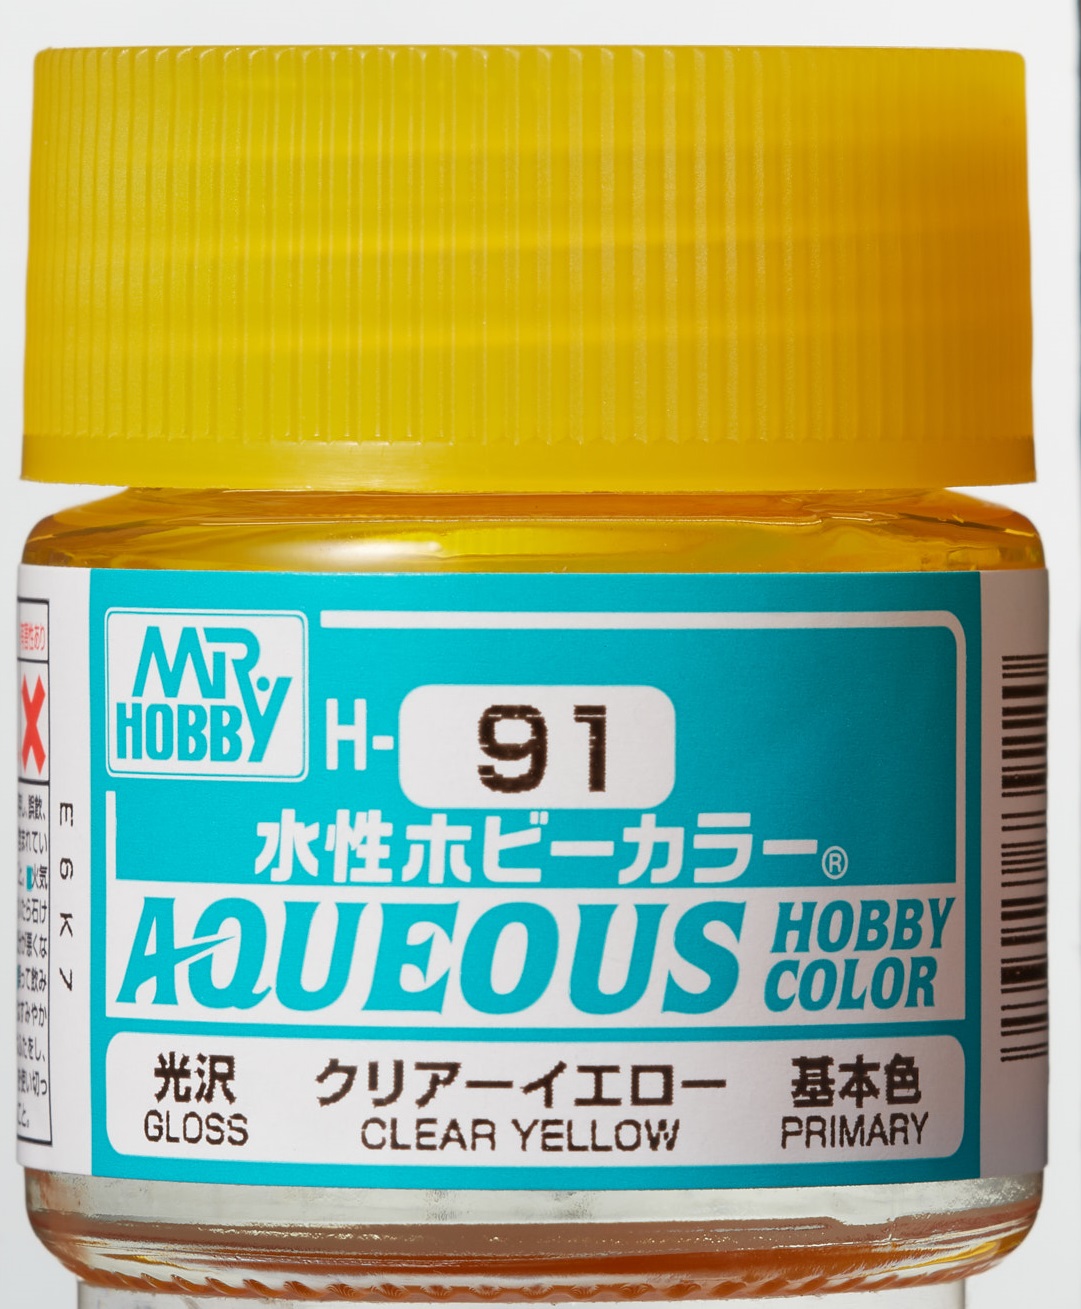 Mr. Aqueous Hobby Color - Clear Yellow - H91 - Gelb Transparent